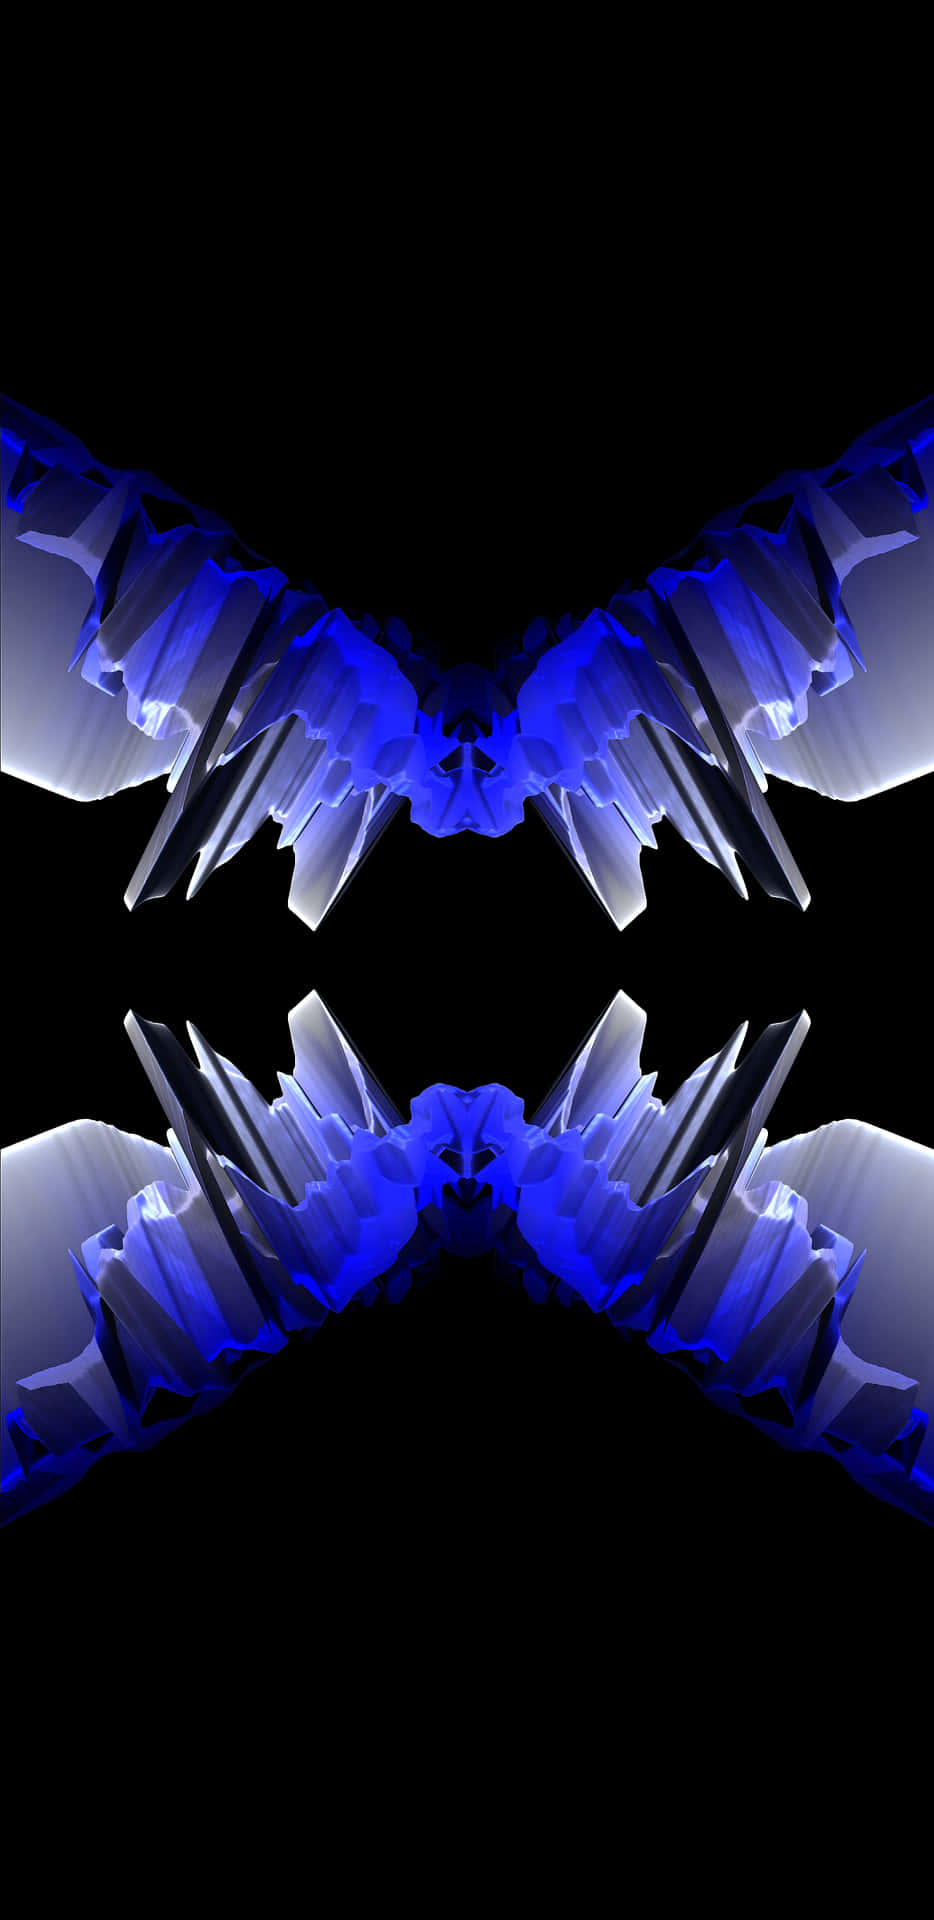 A Blue Abstract Image With A Black Background